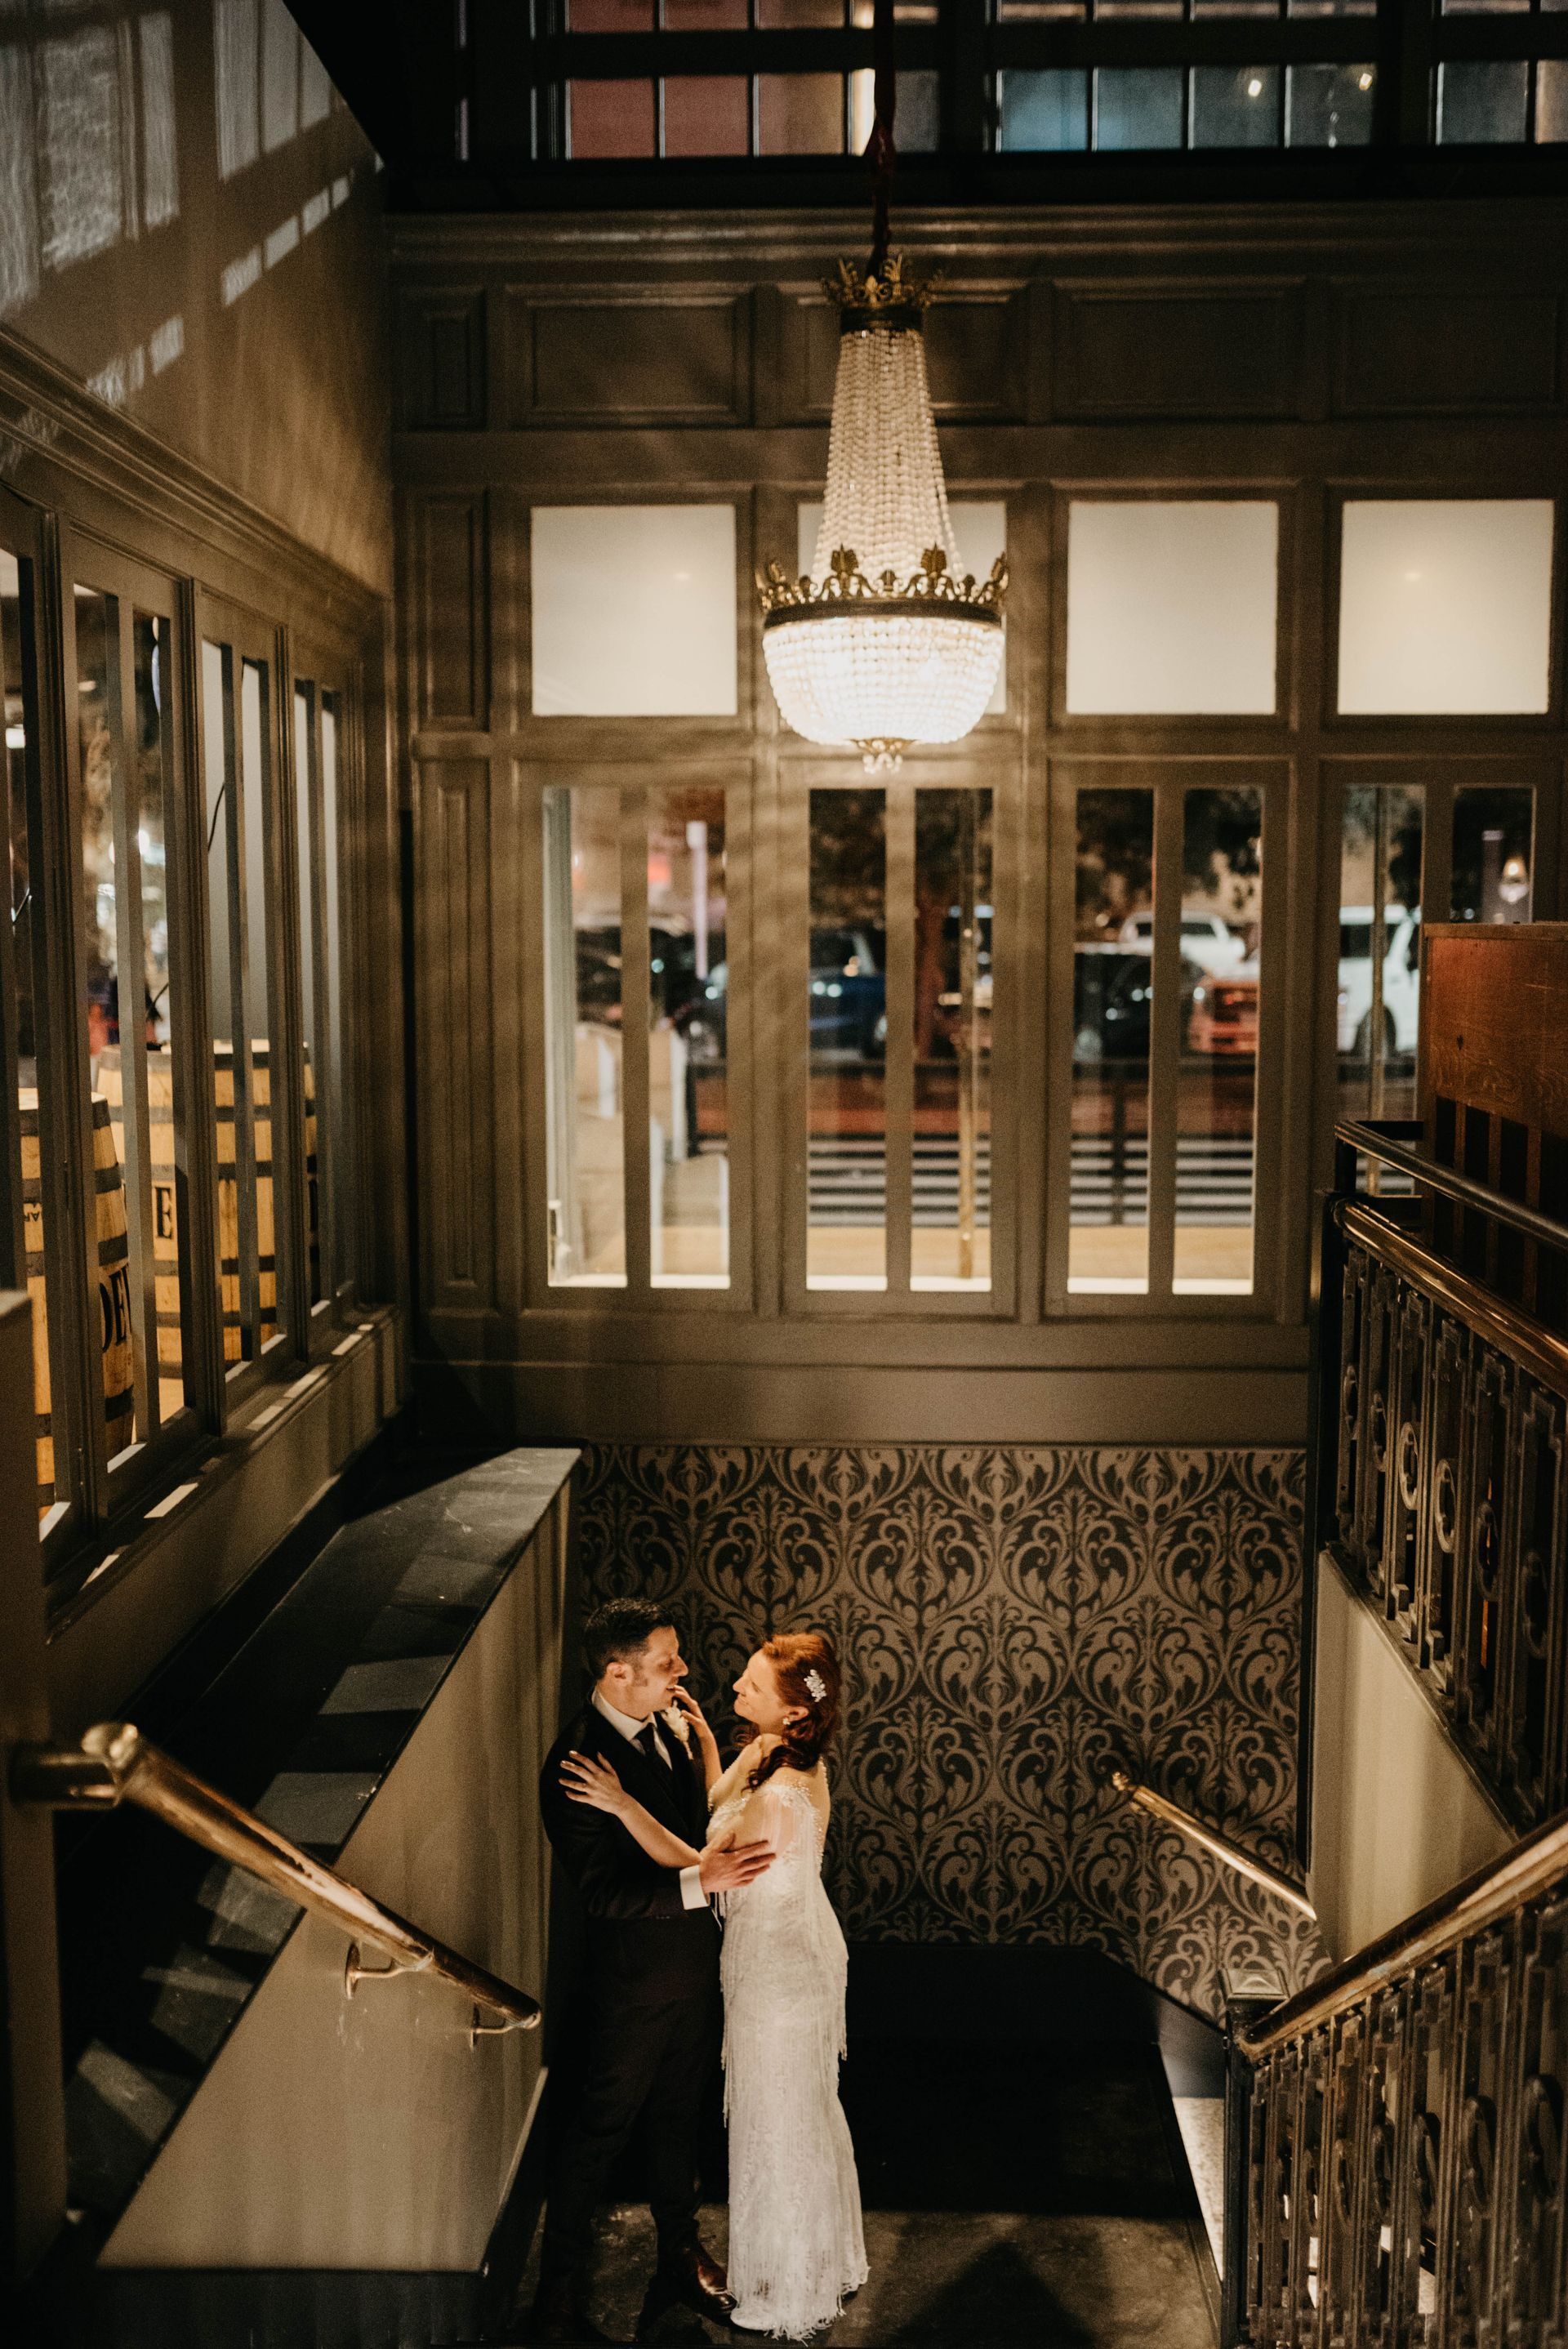 a bride and groom kiss on the stairs of a building